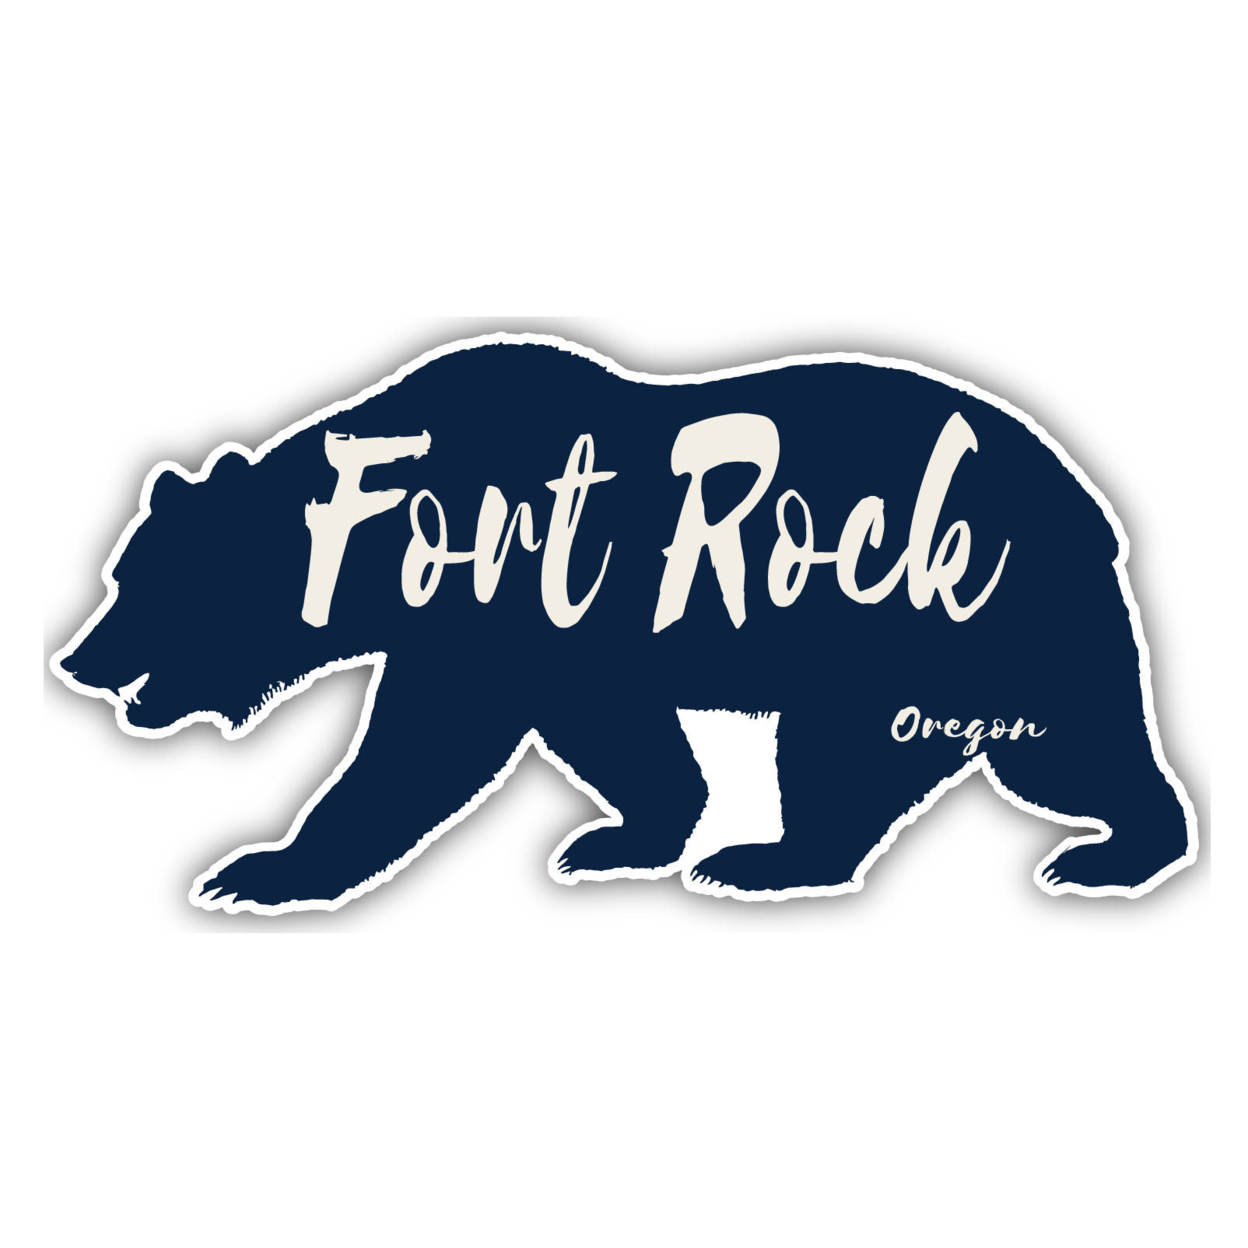 Fort Rock Oregon Souvenir Decorative Stickers (Choose Theme And Size) - 4-Pack, 8-Inch, Bear